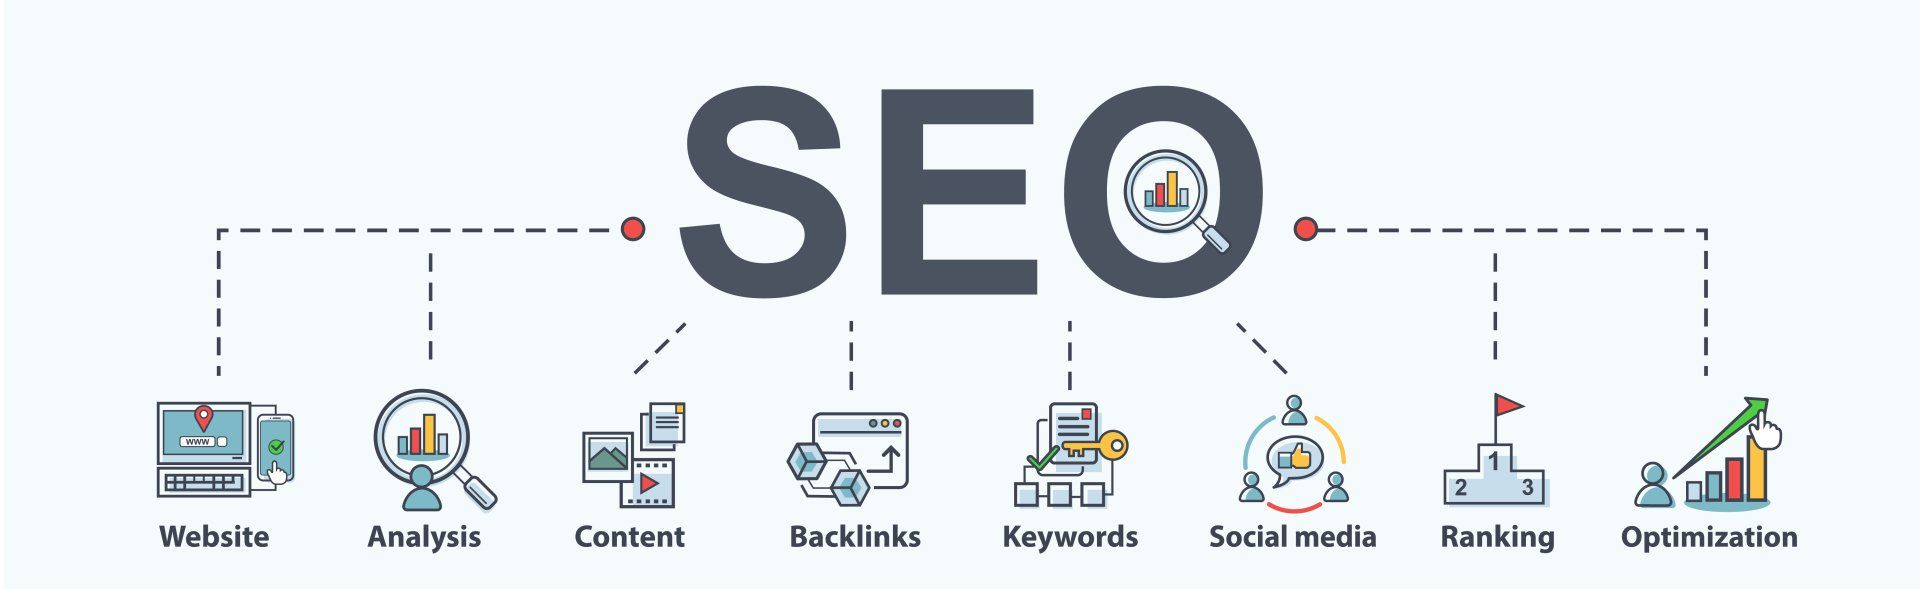 SEO Requirements Diagram of usage